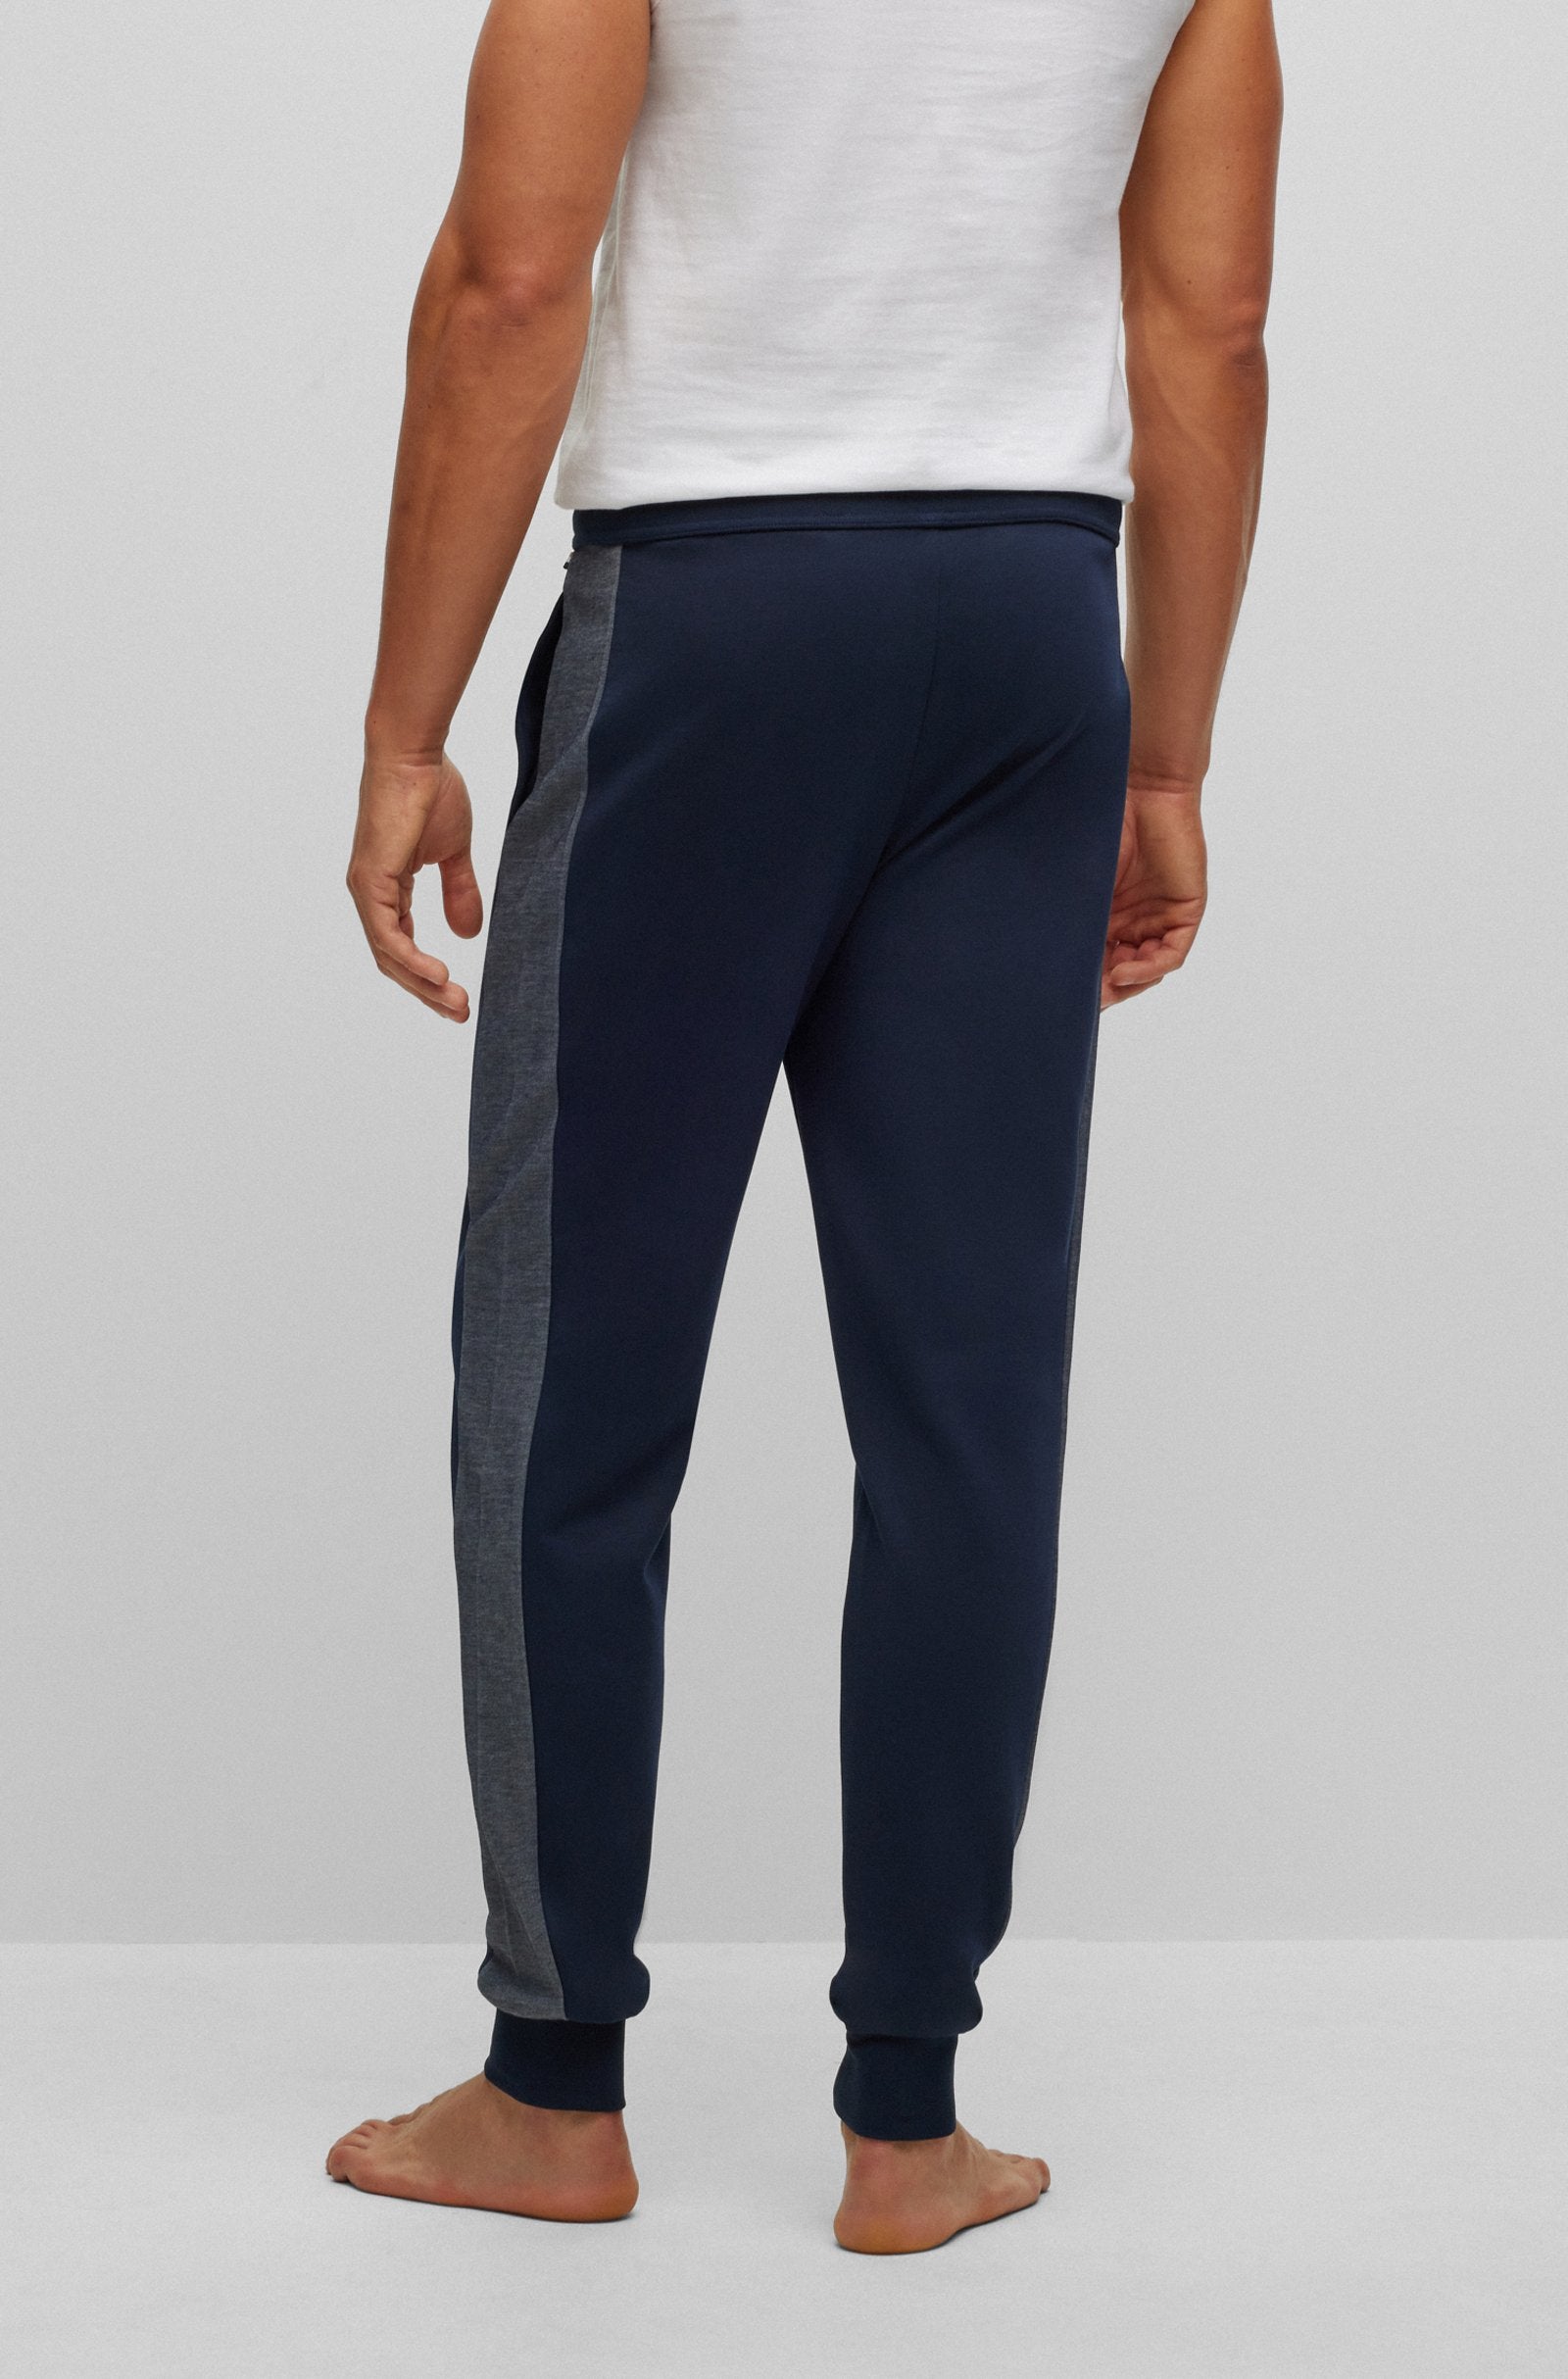 BOSS - Dark Blue SWEATPANTS WITH EMBROIDERED LOGO 50503052 403